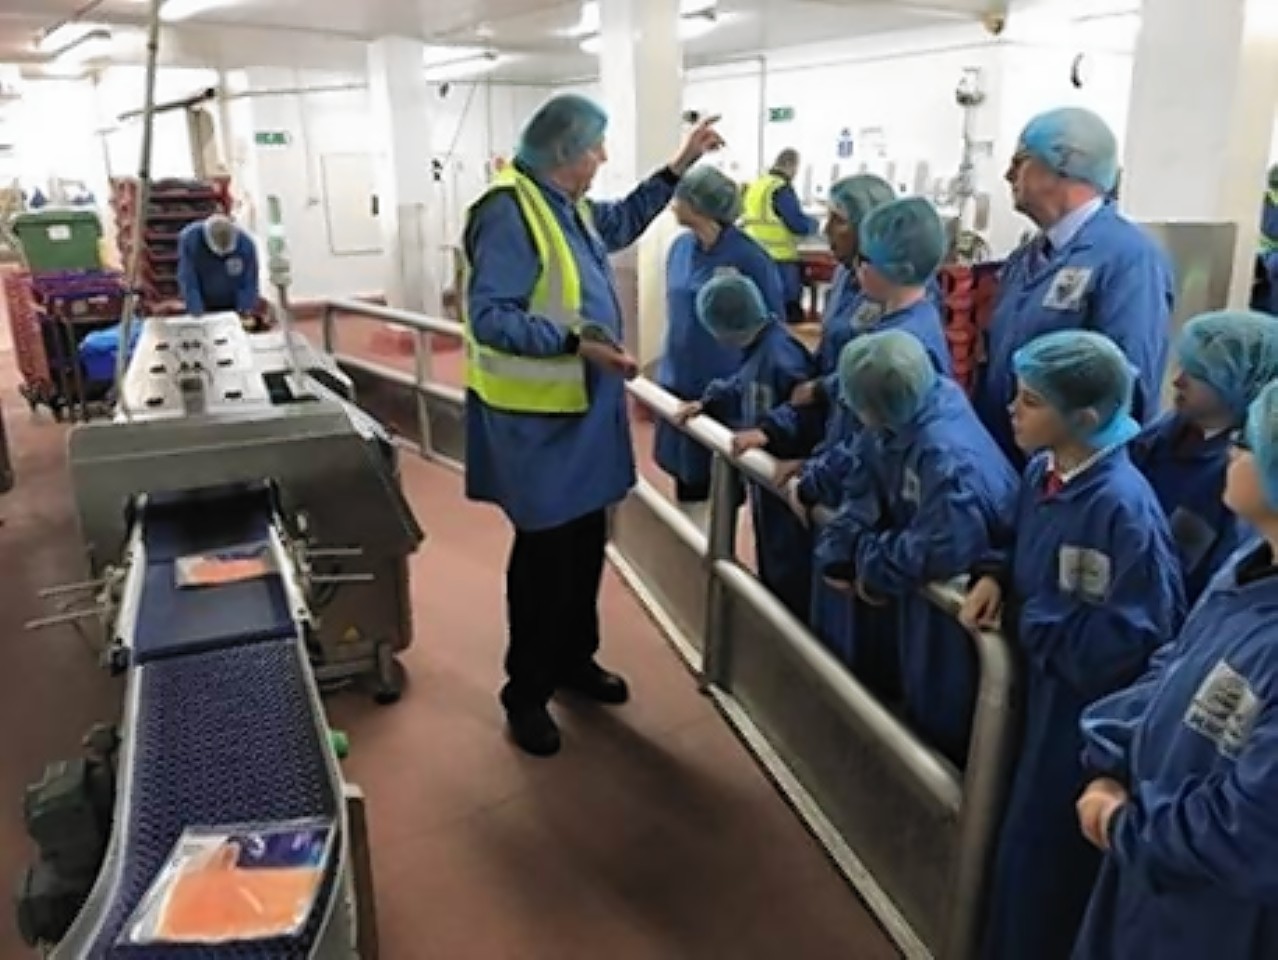 The 10 boys, aged between 10 and 12, each donned blue coats and boots to experience a day as an employee.